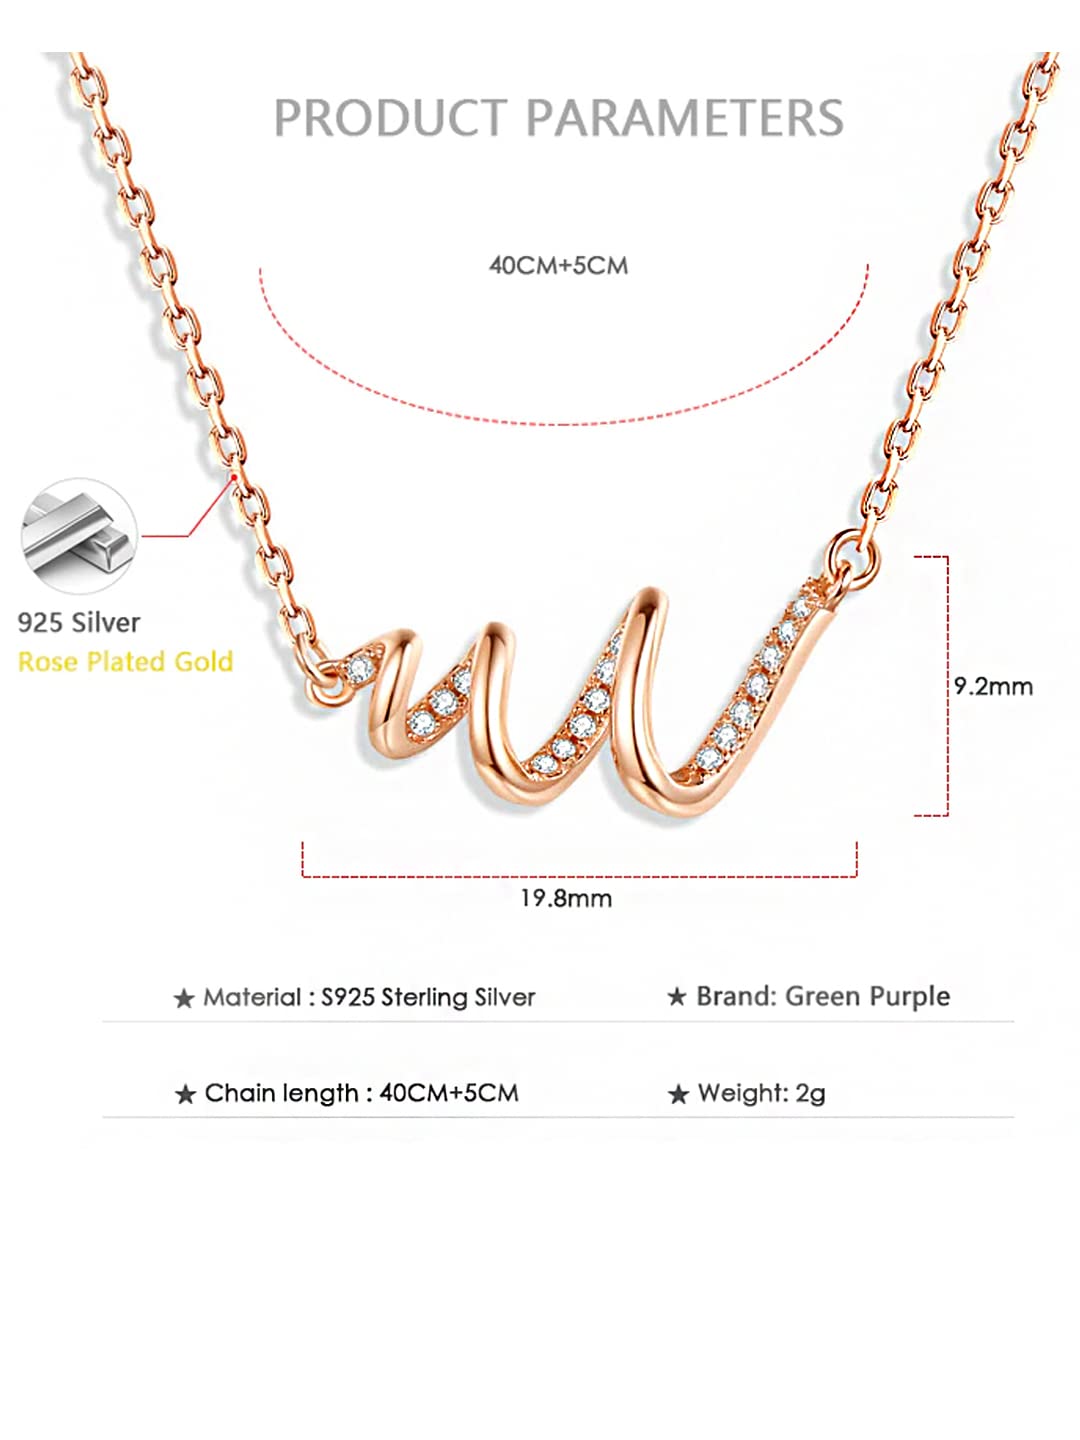 Raajsi by Yellow Chimes 925 Sterling Silver Pendant for Women & Girls Pure Silver Rosegold Pendant | Birthday Gift for Girls & Women|With Certificate of Authenticity and 925 Stamp